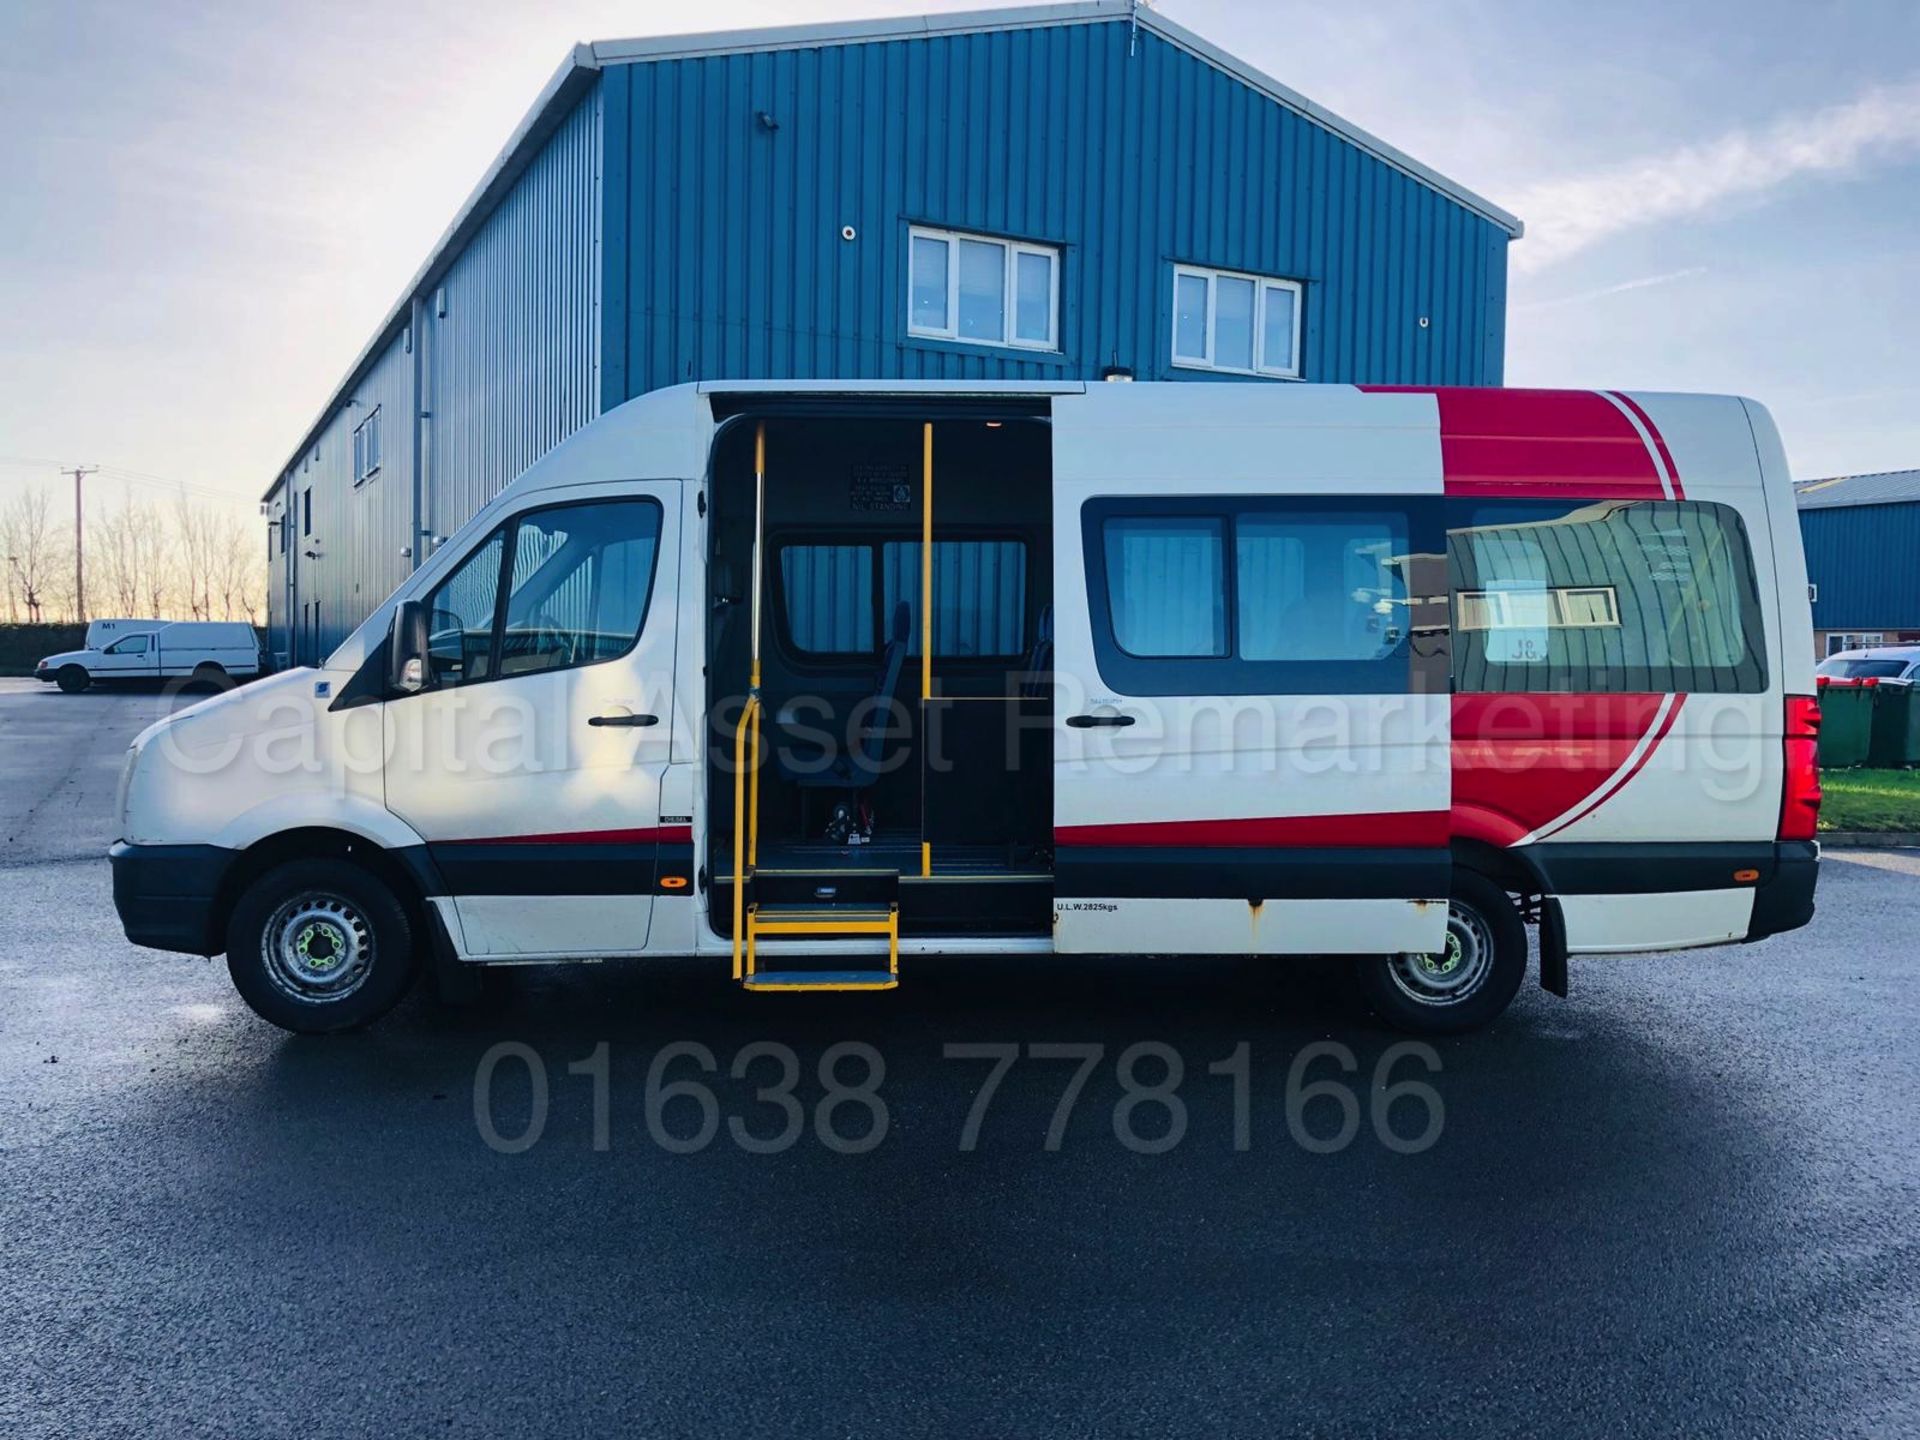 (On Sale) VOLKSWAGEN CRAFTER 2.5 TDI *LWB - 16 SEATER MINI-BUS* (2007) *ELECTRIC WHEEL CHAIR LIFT* - Image 13 of 35